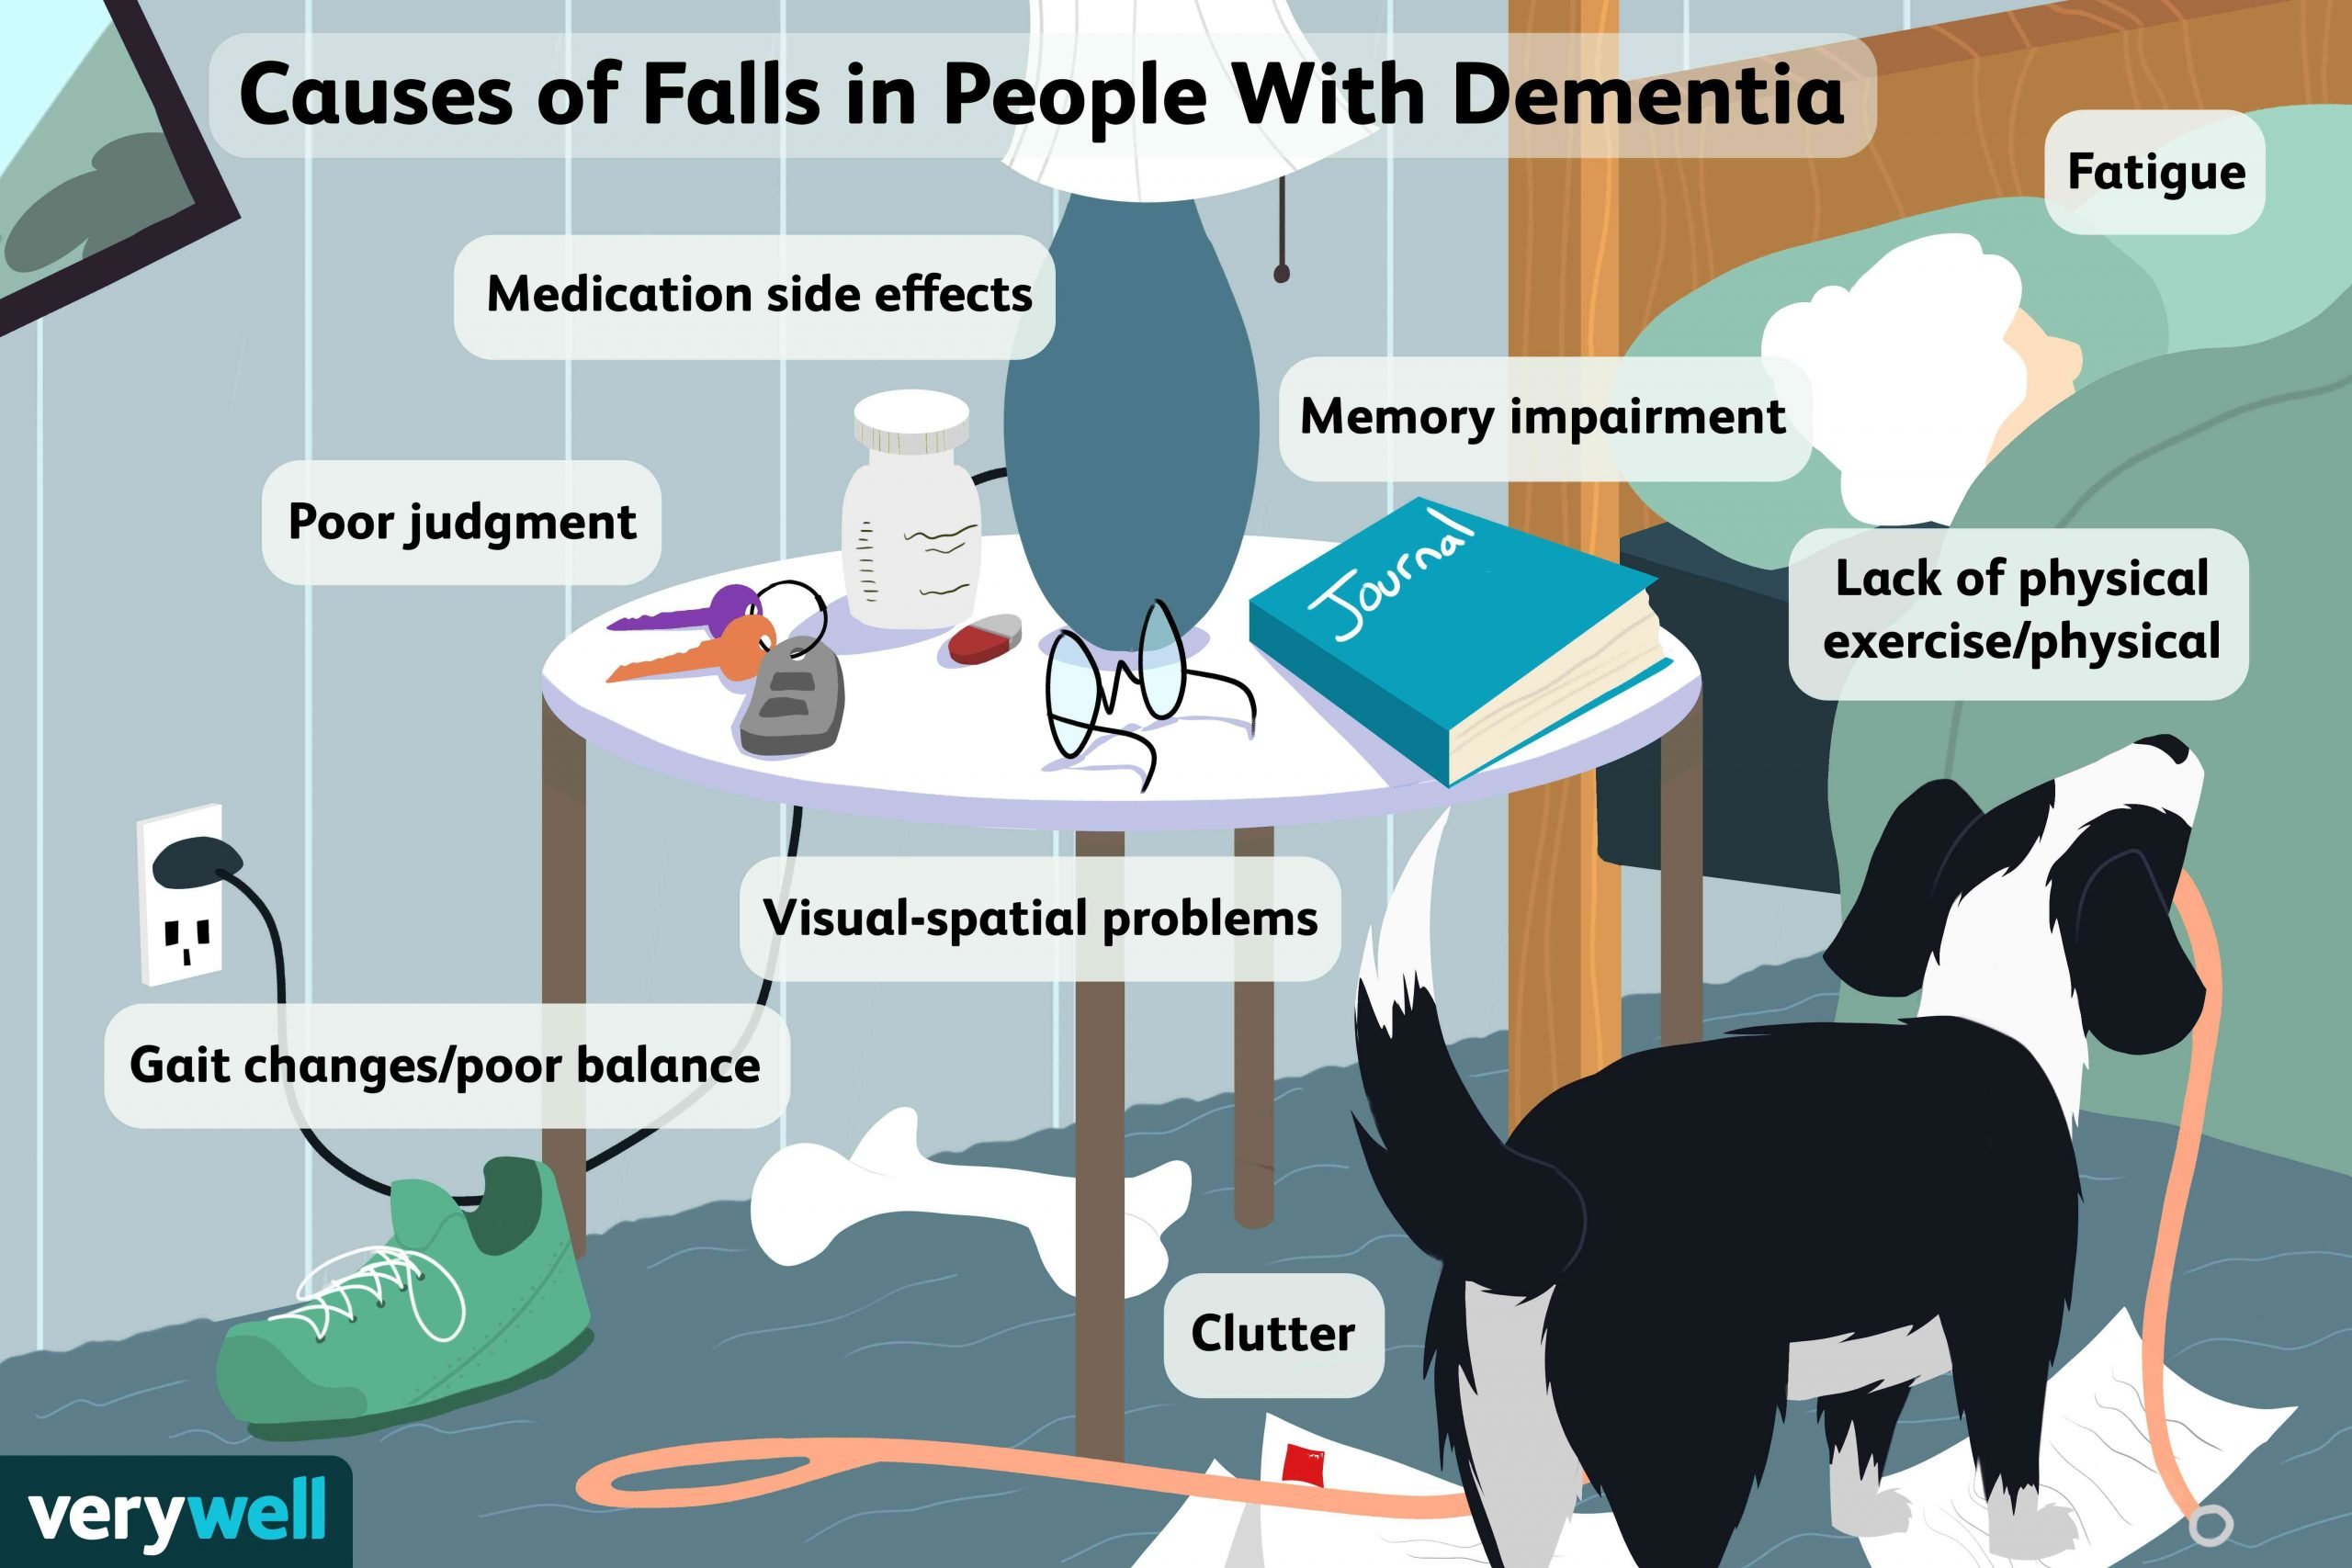 Common Causes of Falls in People With Dementia